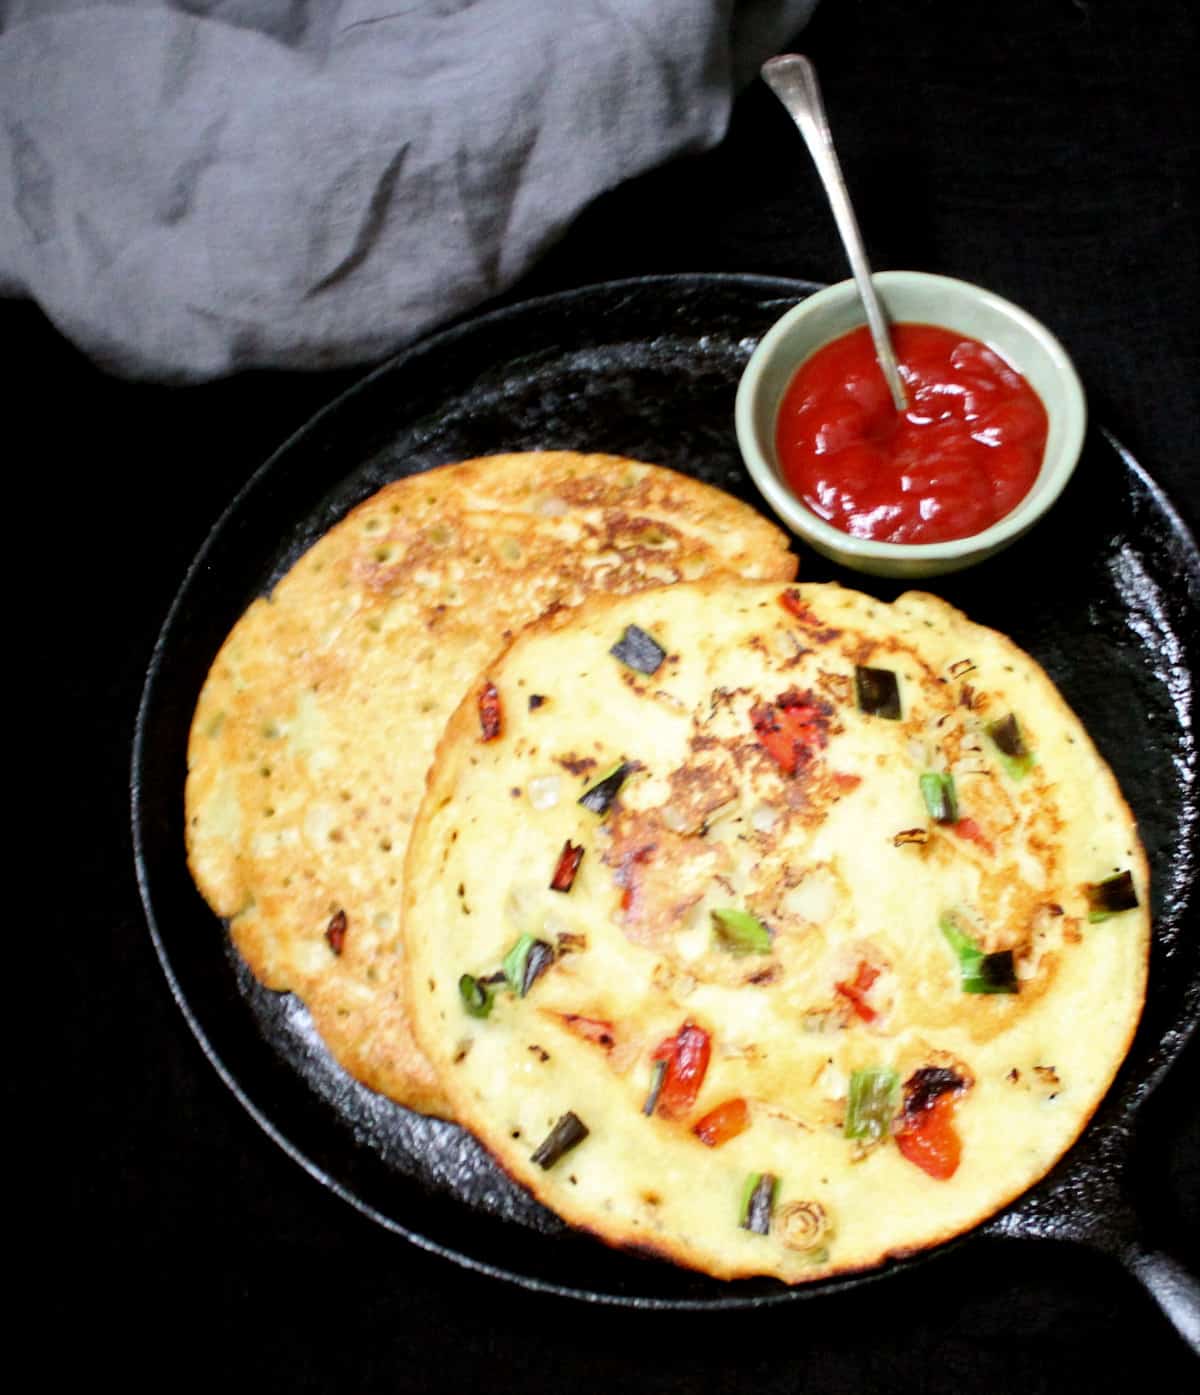 Overhead shot of Indian style moonglets or munglets with bits of vegetables on a cast iron griddle with ketchup and a gray napkin in the background.